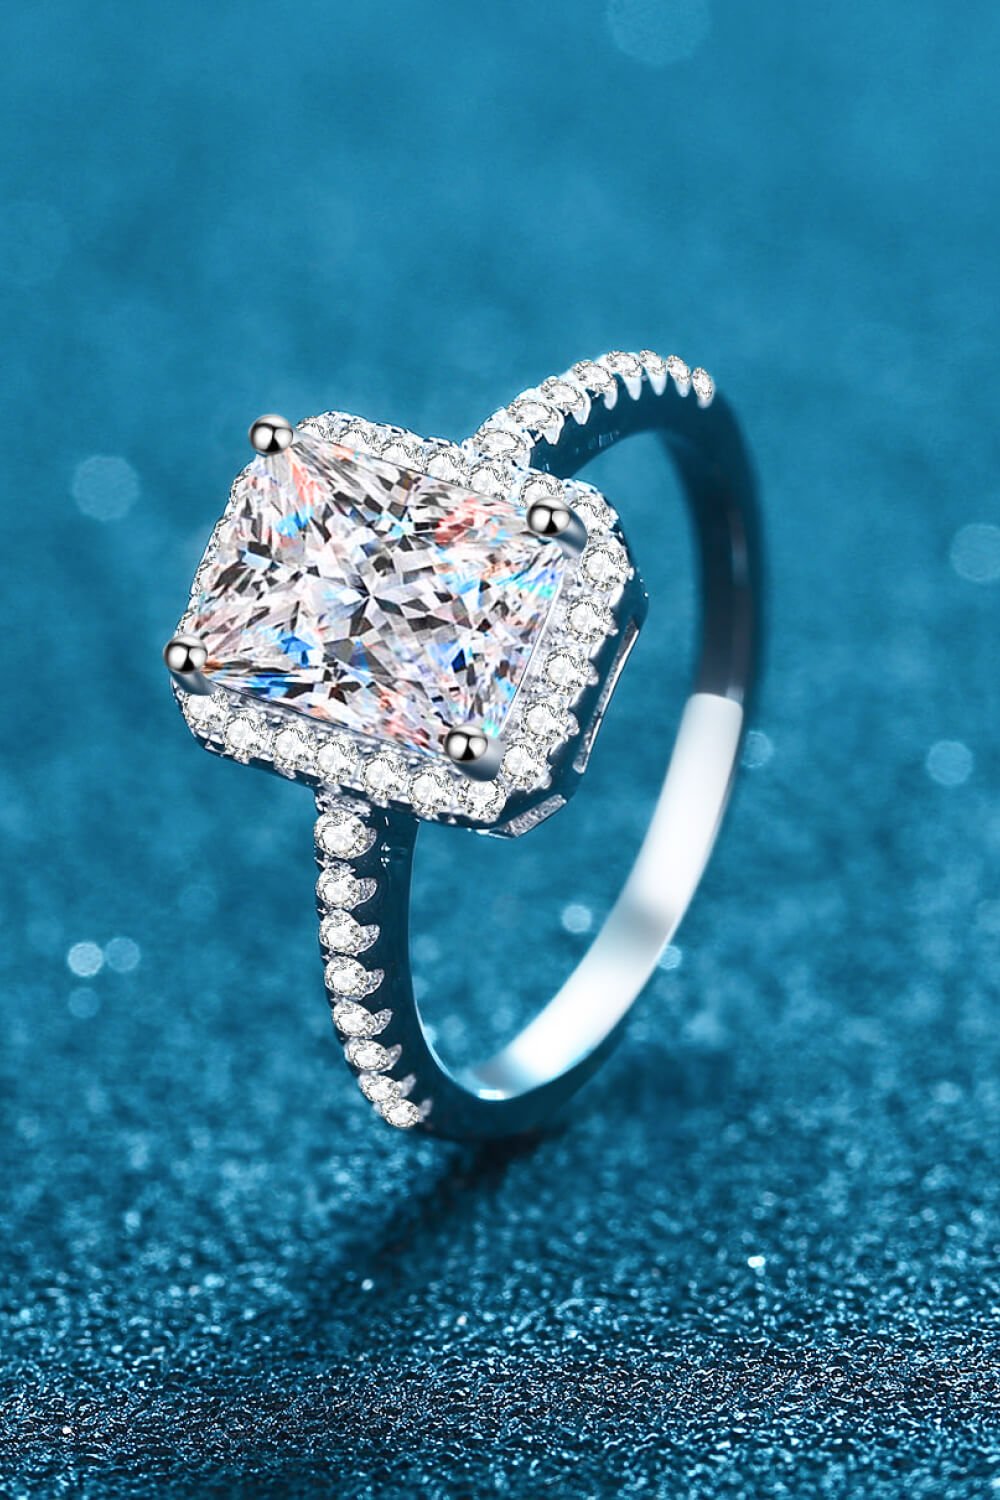 "Enchanting Love Story - Experience Forever with our 1 Carat Rectangle Moissanite Ring" - Guy Christopher